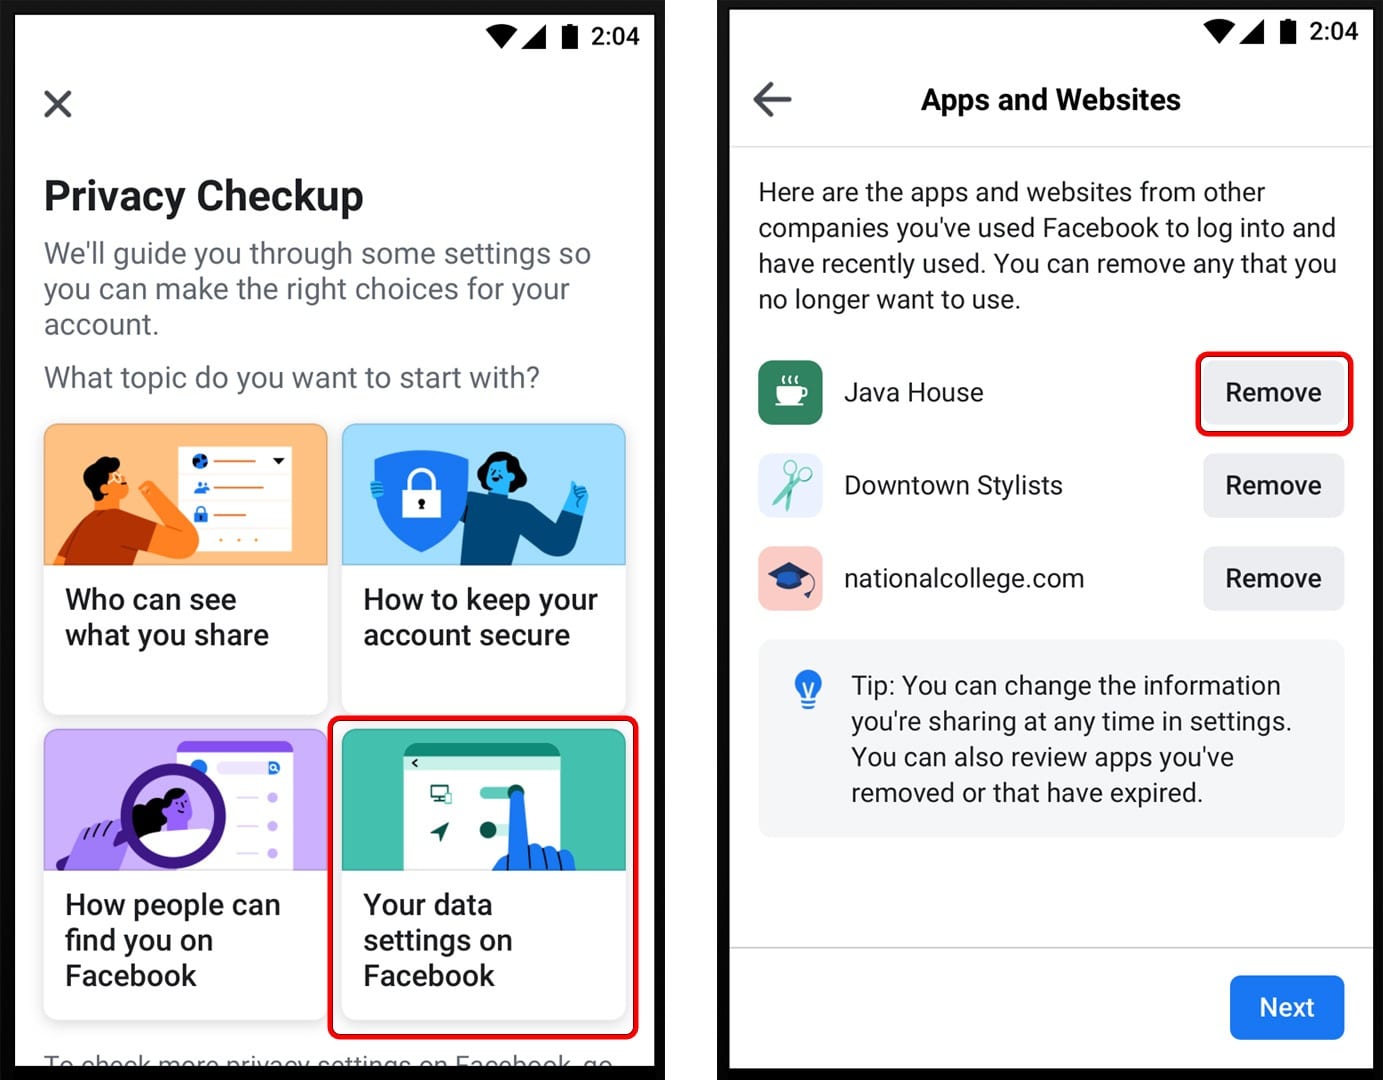 How to Use Facebook’s Privacy Check-Up Tool